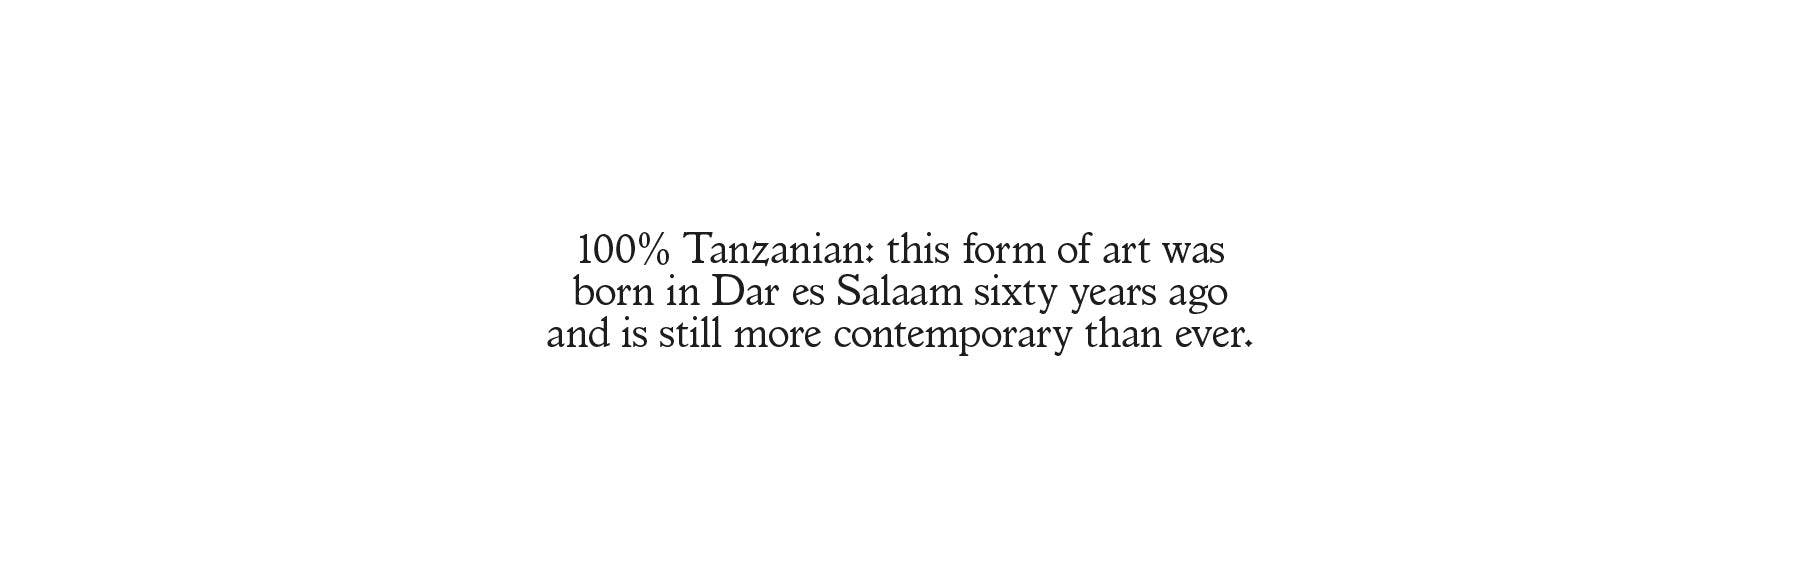 100% Tanzanian: this form of art was born in Dar es Salaam sixty years ago and is still more contemporary than ever